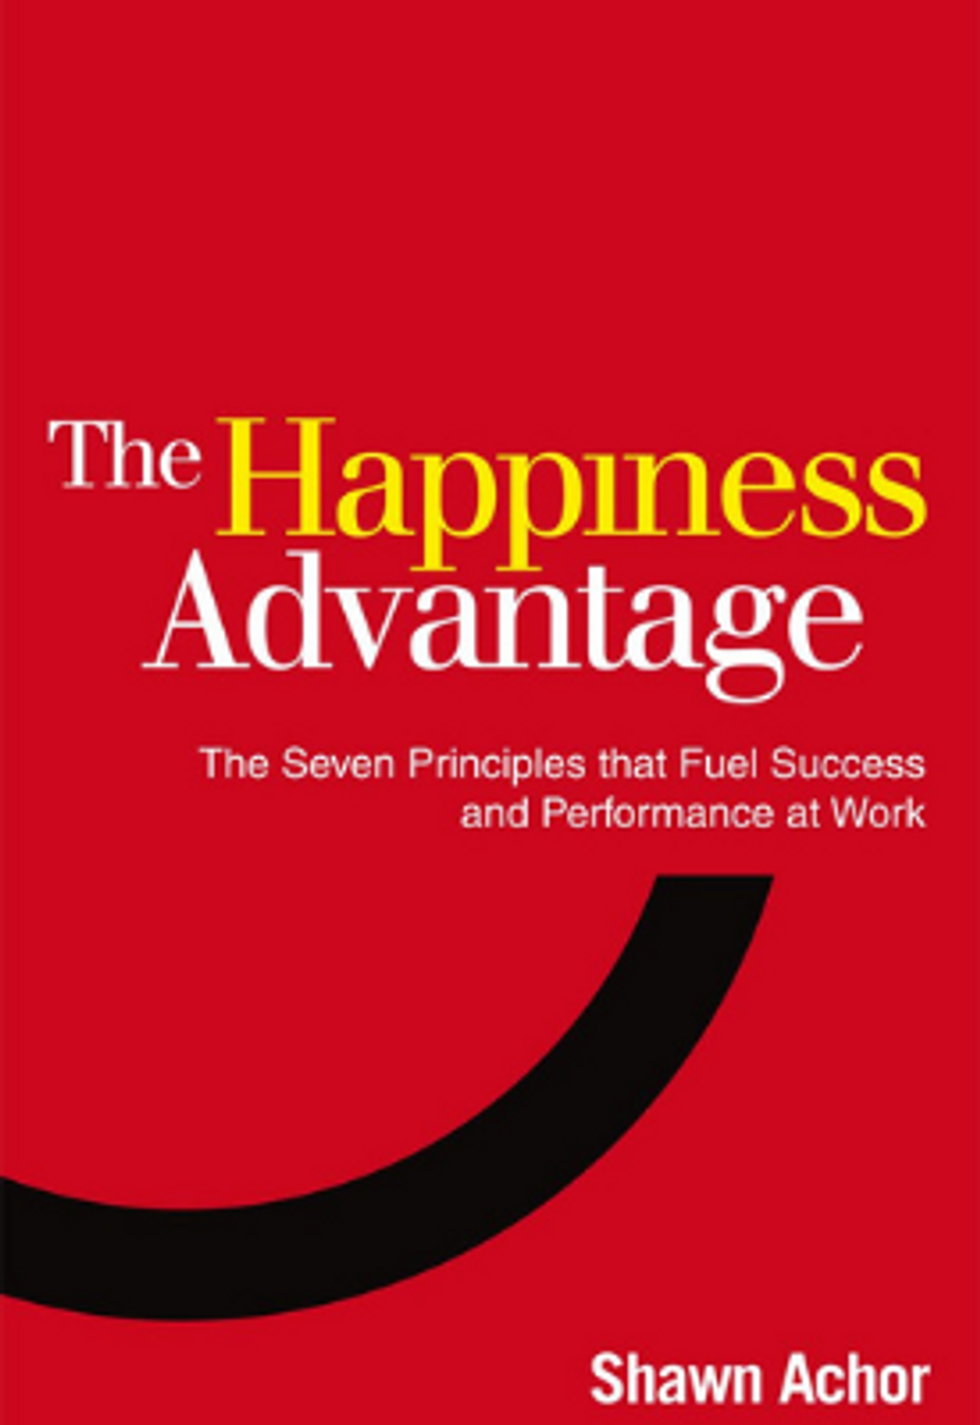 The front cover of the book "The Happiness Advantage: the 7 Principles of Positive Psychology That Fuel Success and Performance at Work" by Shawn Anchor